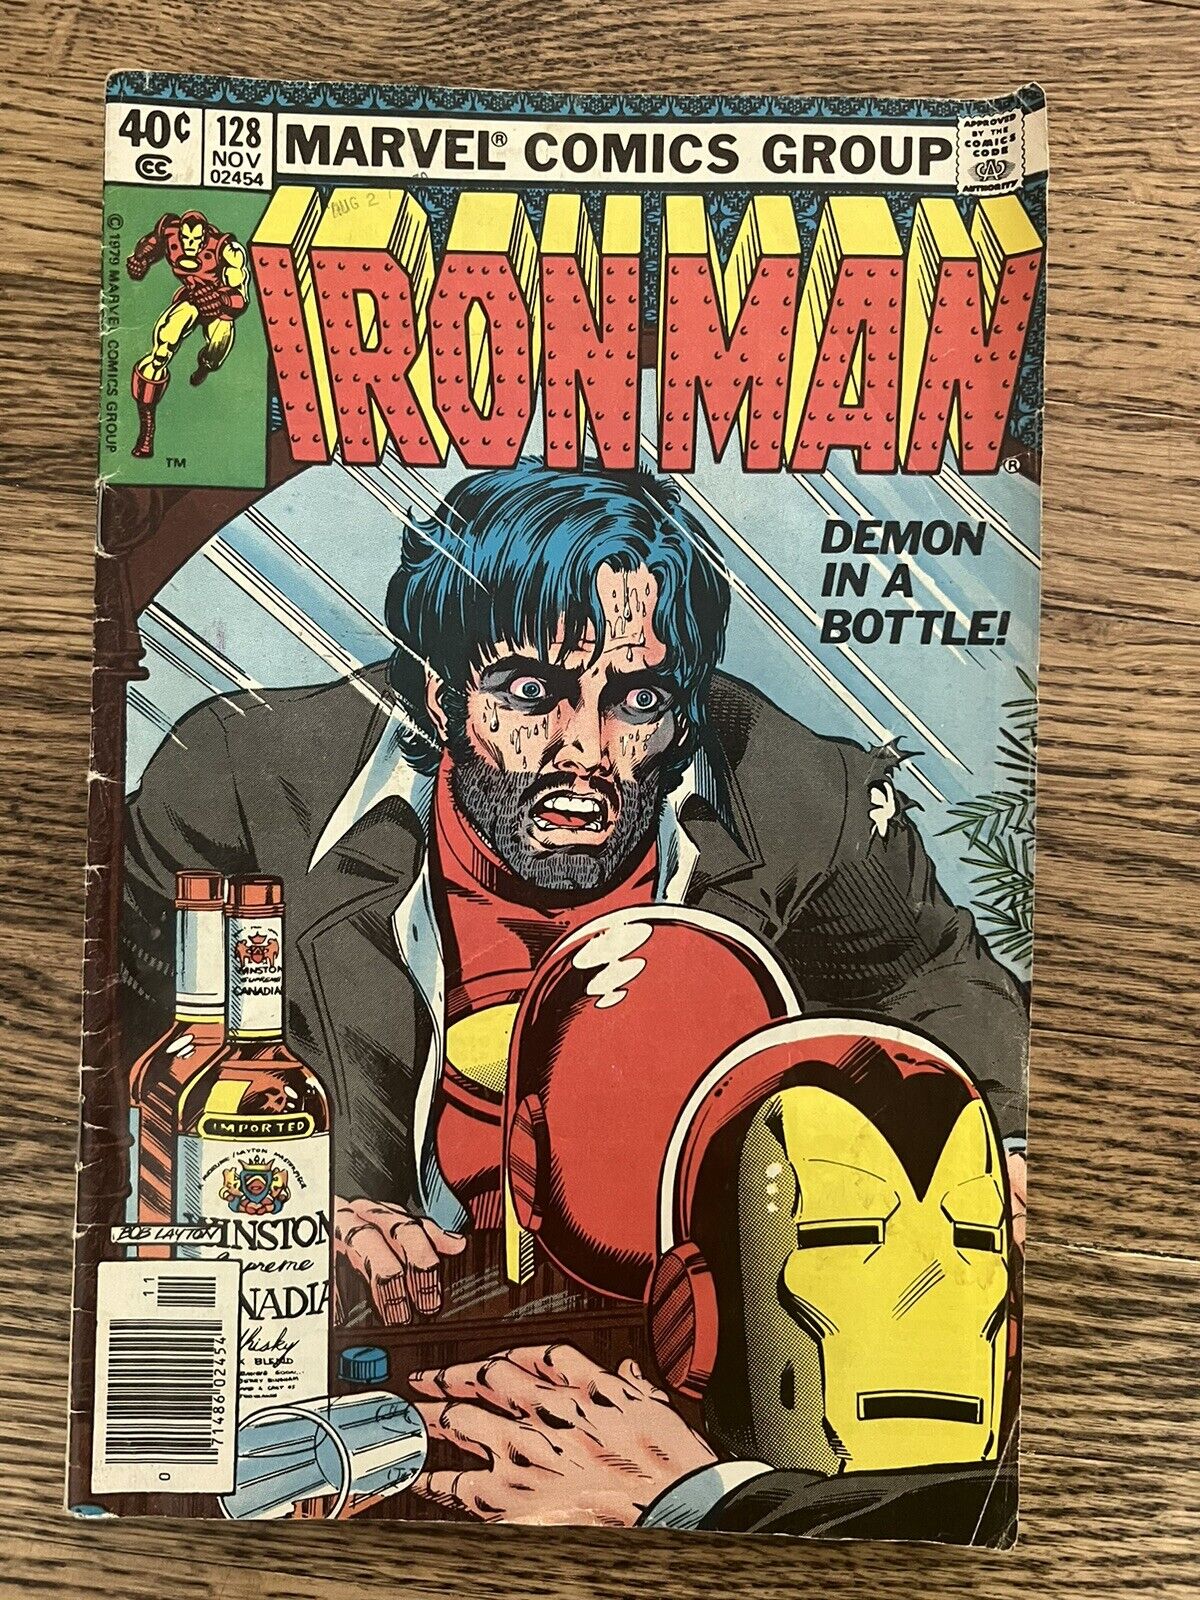 IRON MAN #128 (1979) Demon In A Bottle VF? Key Marvel Alcoholism Cover Pics